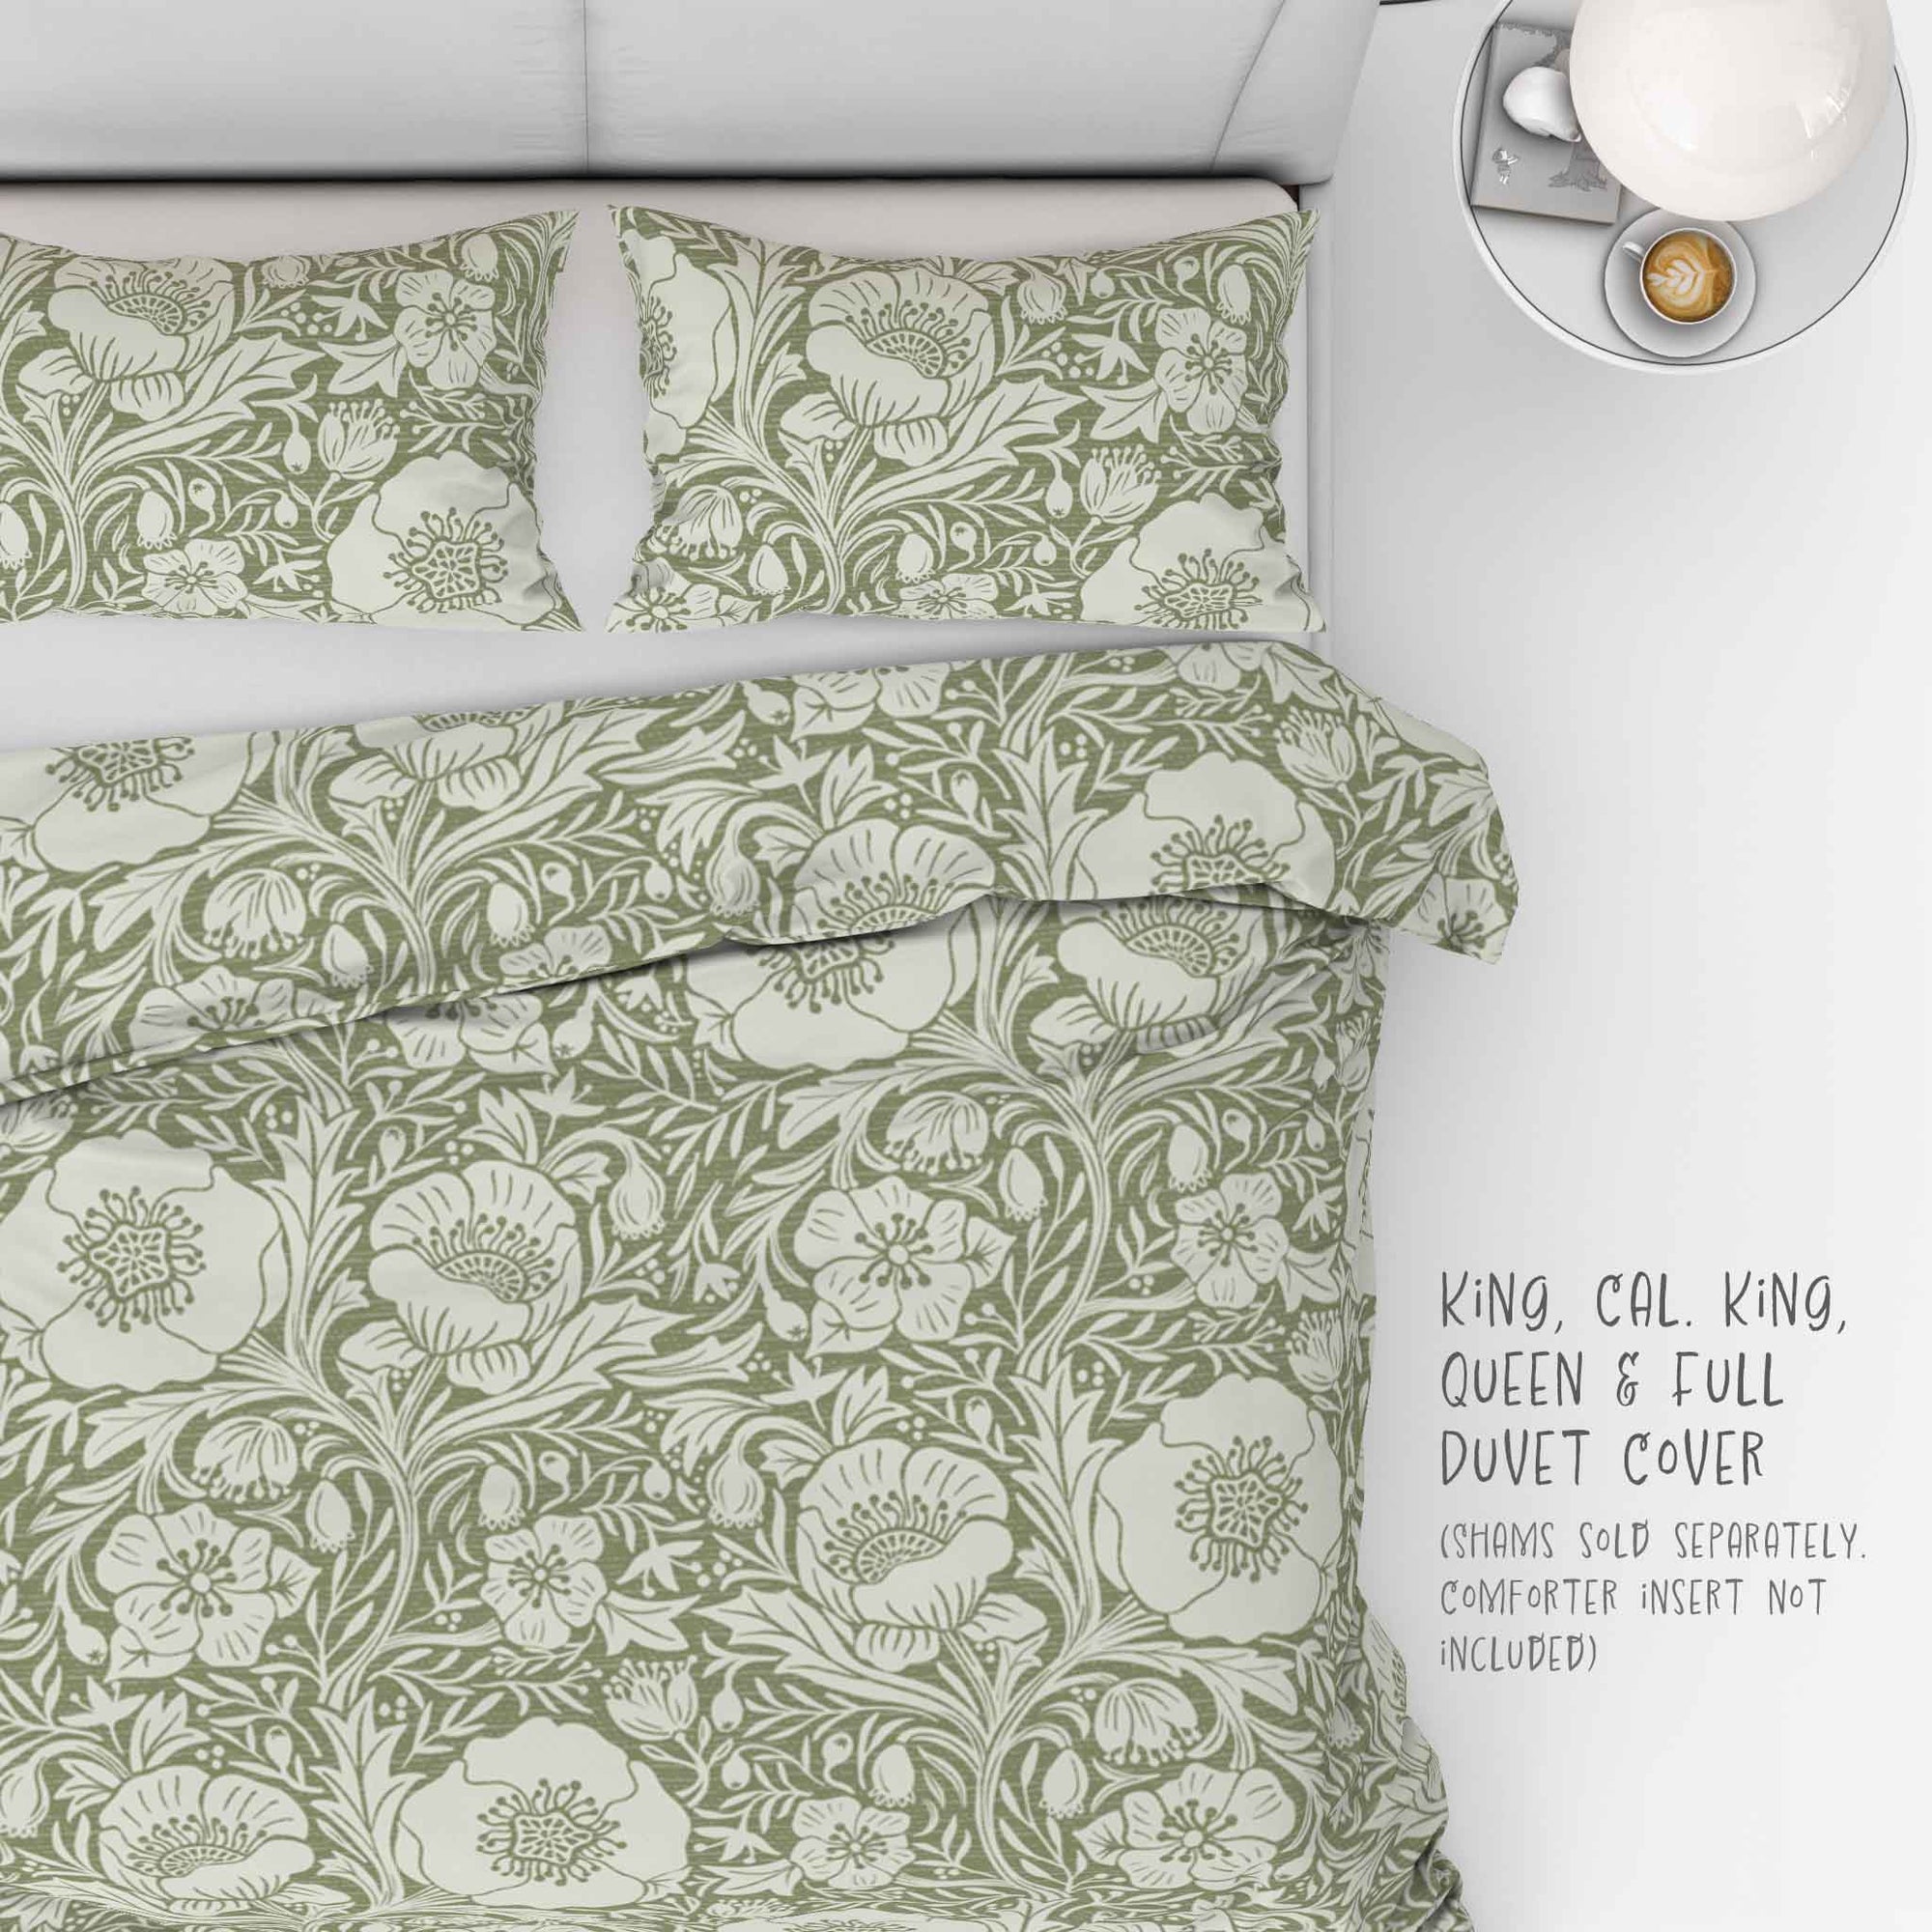 Poppies on sage background 100% Cotton Duvet Cover: King, Cal King, Queen and Full sizes.